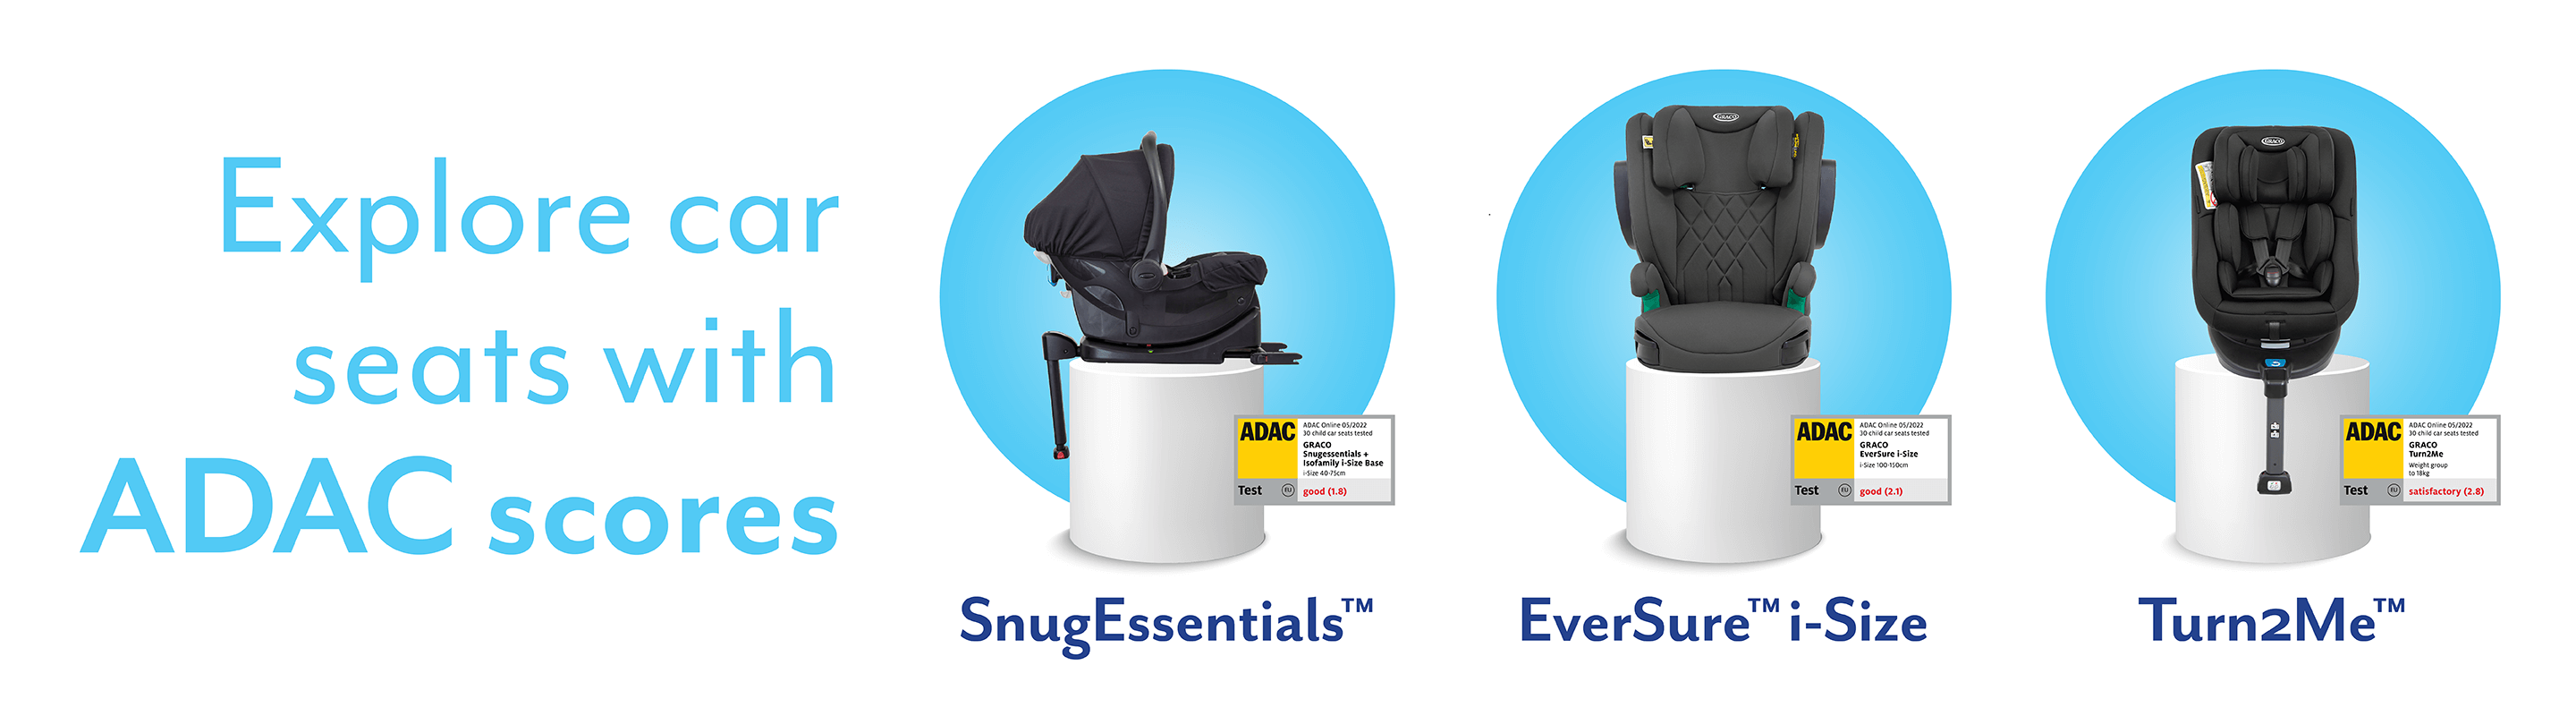 Graco's SnugEssentials, EverSure i-Size and Turn2Me car seats on a white pedestal